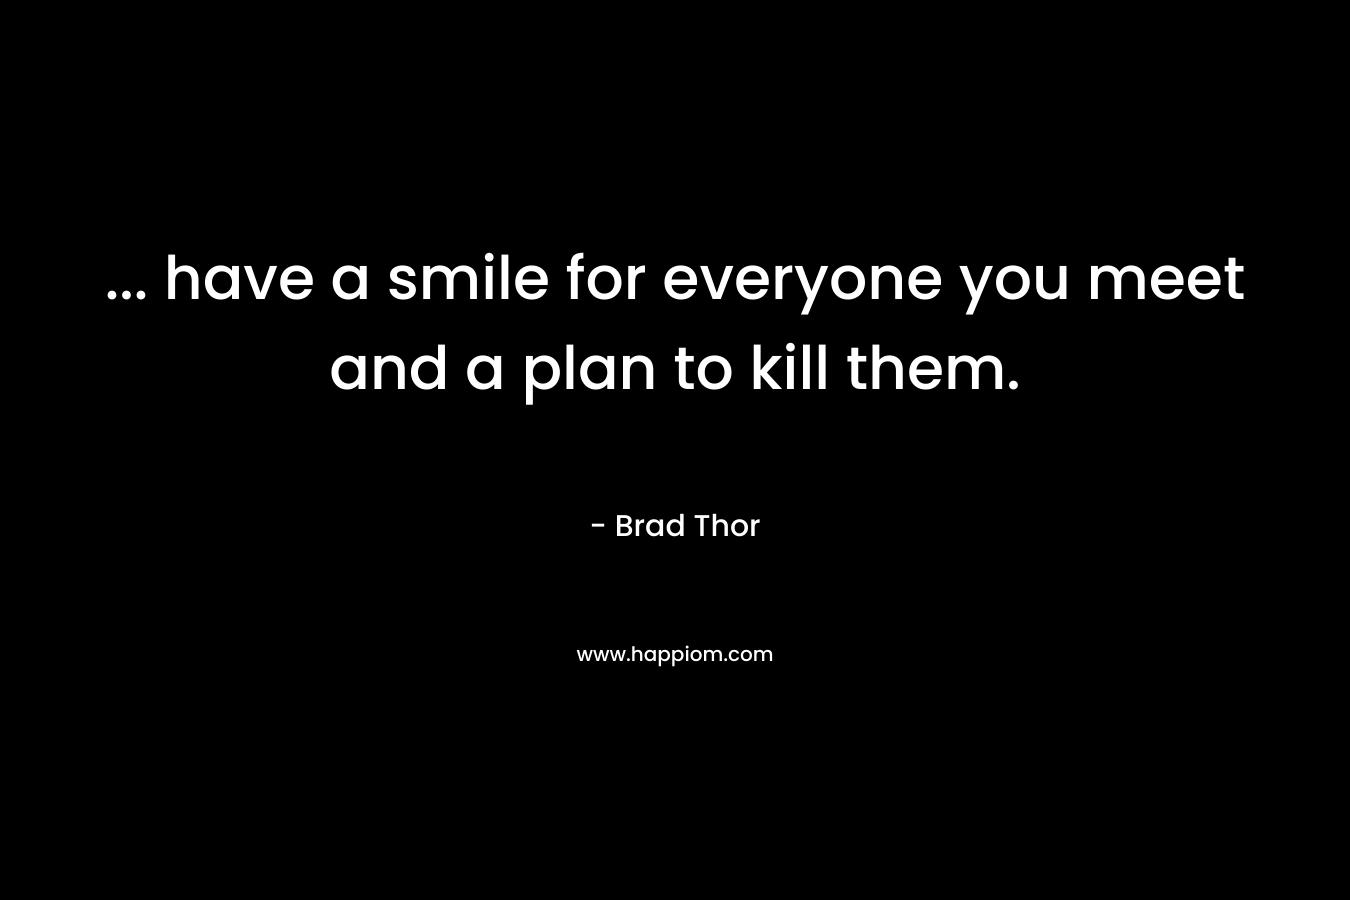 ... have a smile for everyone you meet and a plan to kill them.